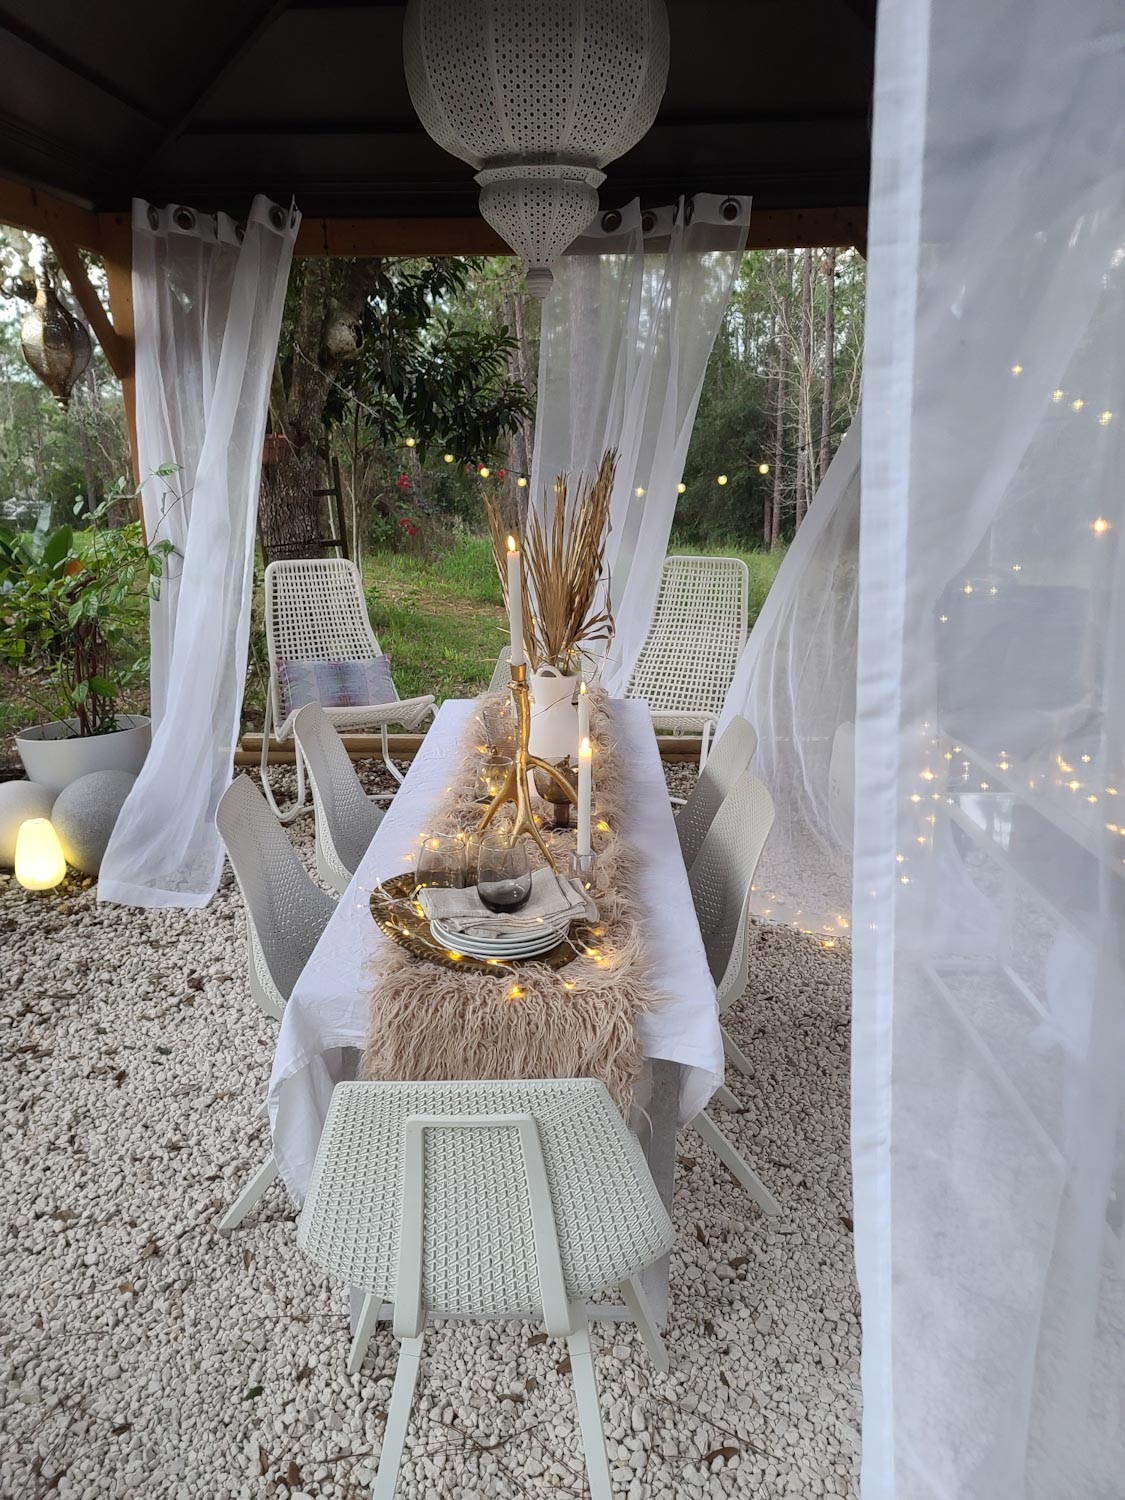 Cozy White Winter Outdoors Bed Bath & Beyond Firepit Dining Candles Tablescape Tablesetting Scandinavian Modern Farmhouse Fur Antlers Gold White Twinkle Lights Beautiful Country living Lounge Area Garden Sparkle Design Decor Styling Wonderland